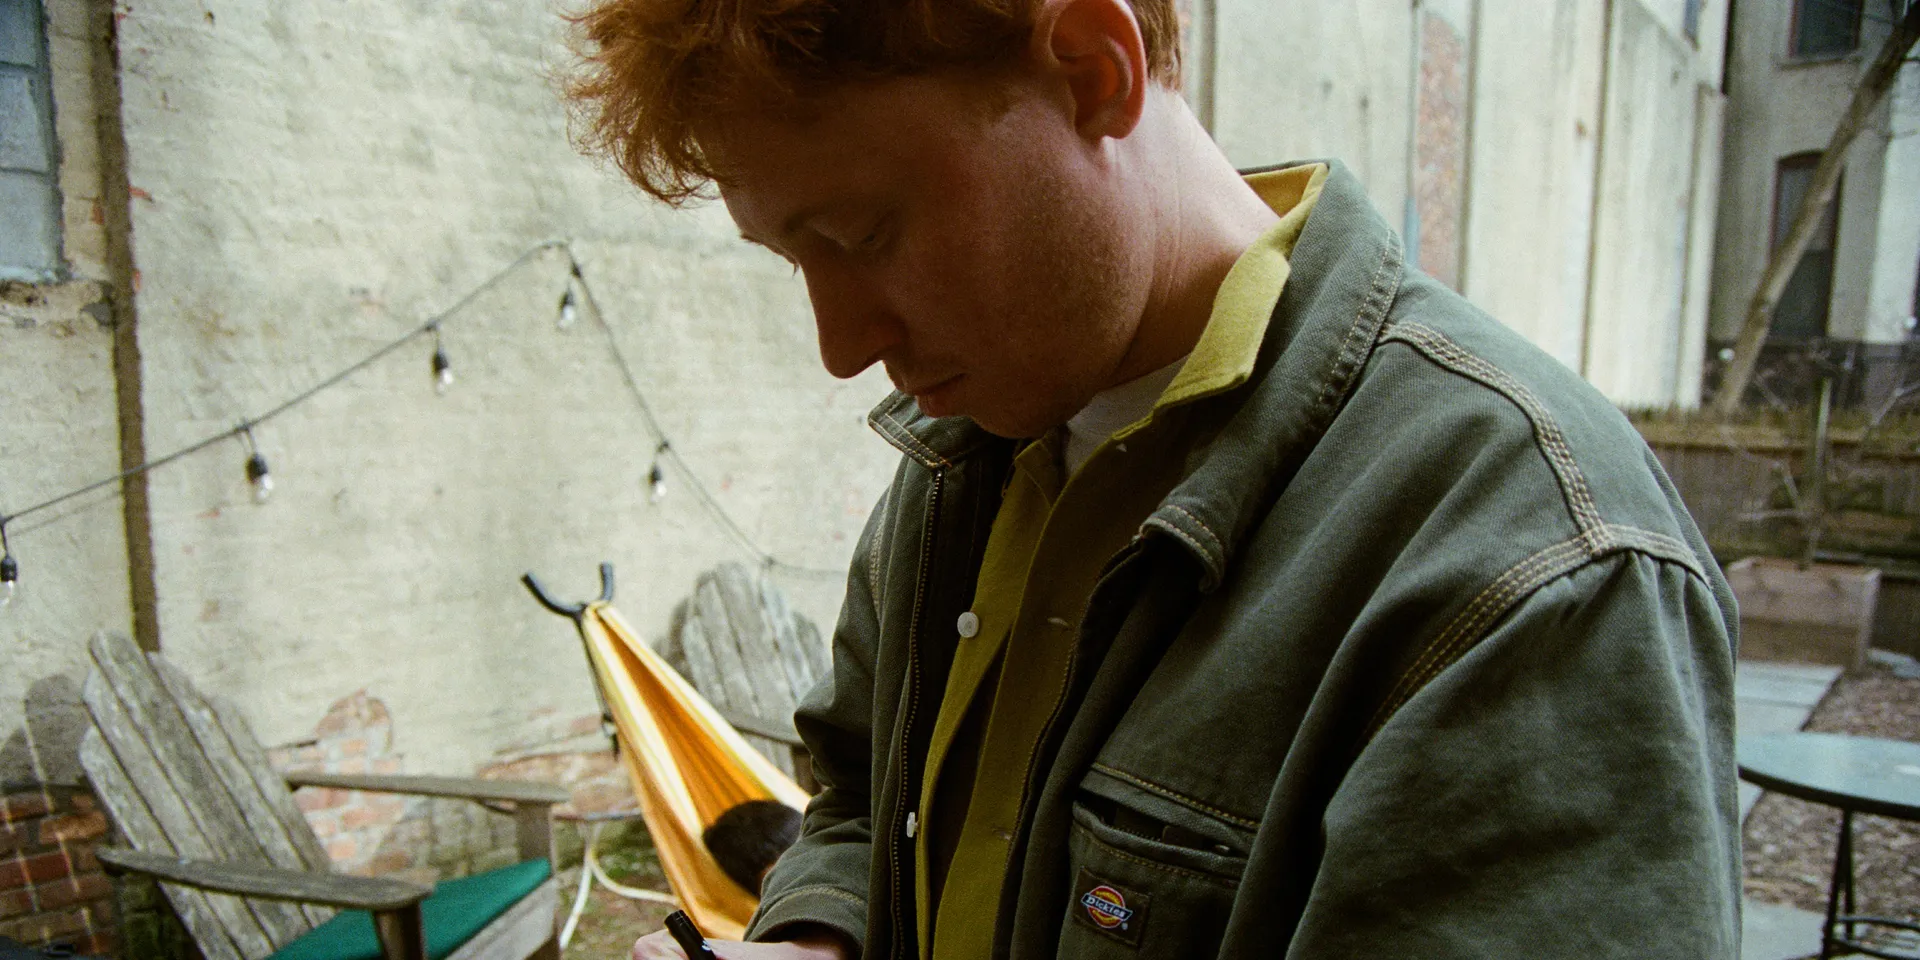 Watch King Krule’s New Concert Film “You’ll Never Guess What Happened Next”